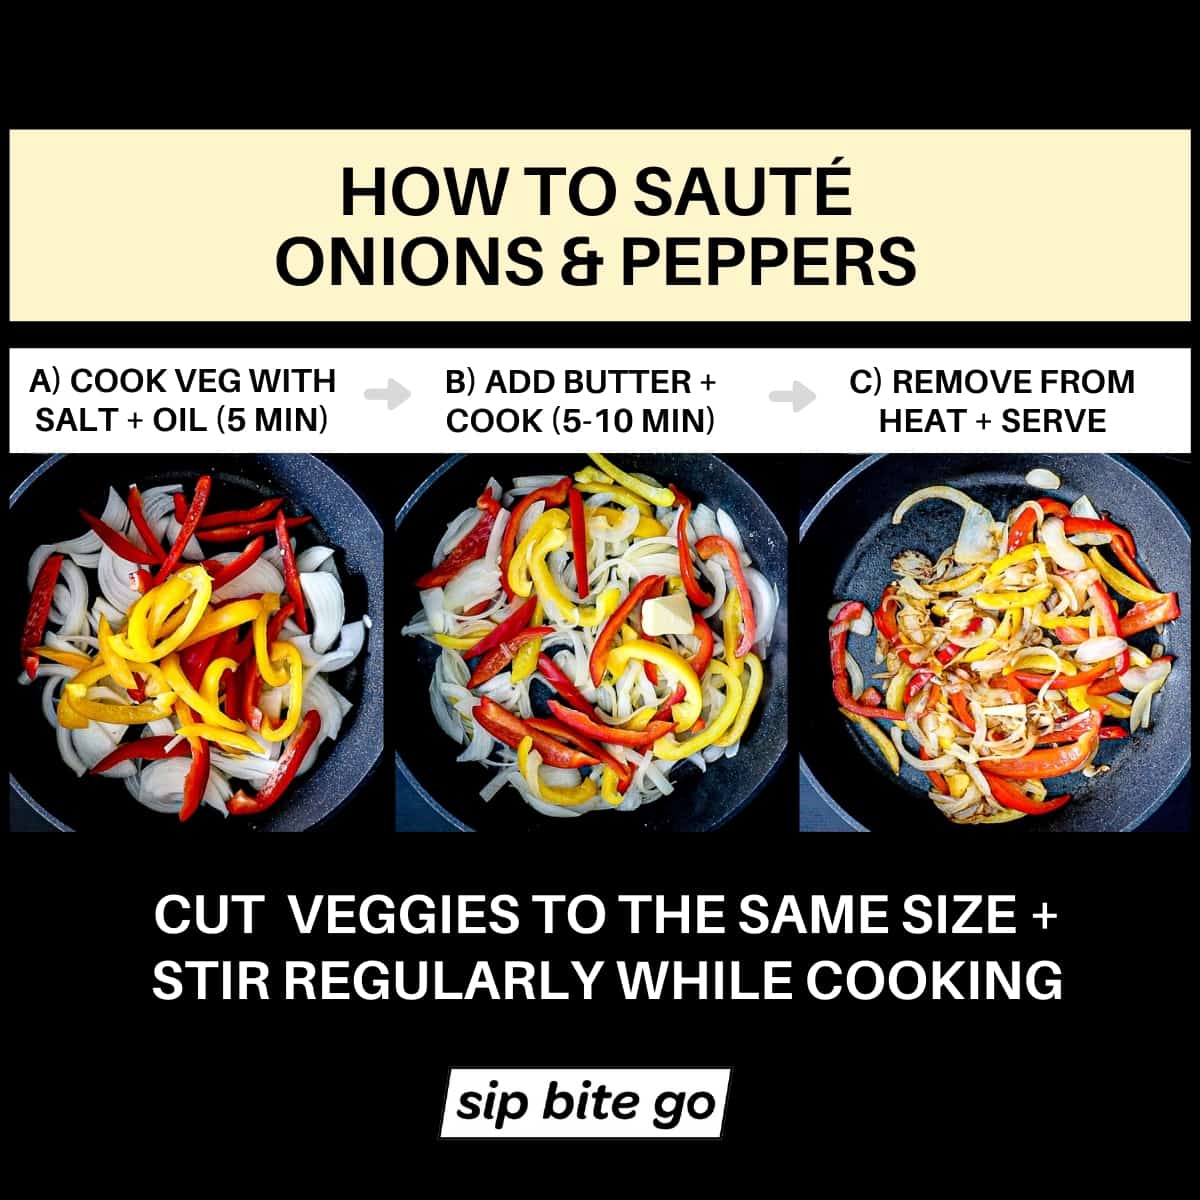 Infographic chart demonstrating how to saute onions and peppers for pizza with steak with recipe tips and step by step captions and photos.